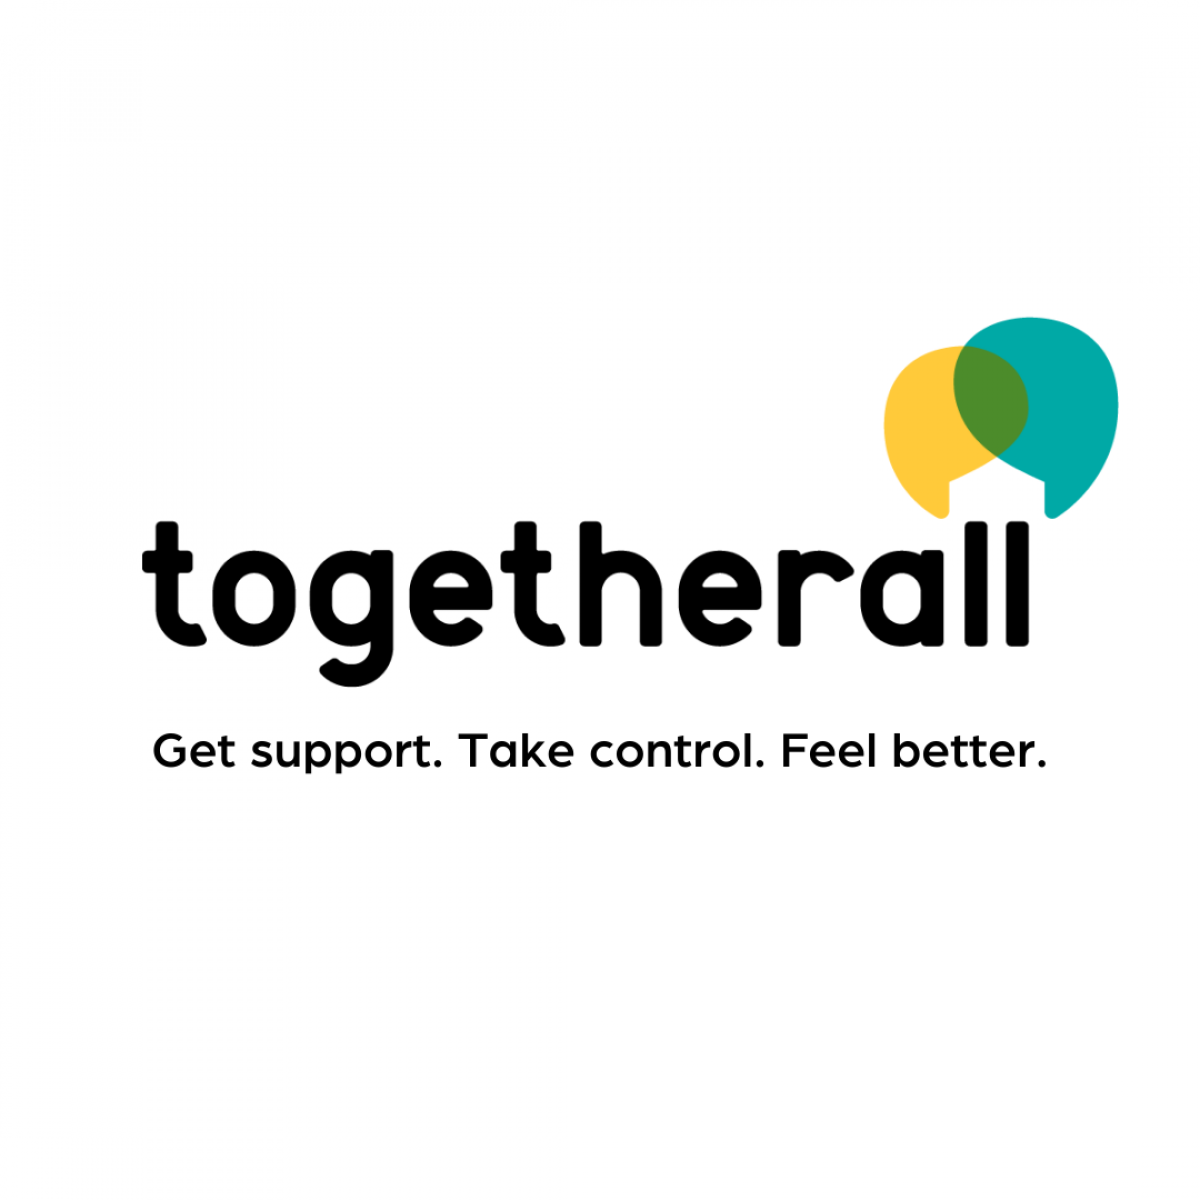 togetherall mental health service